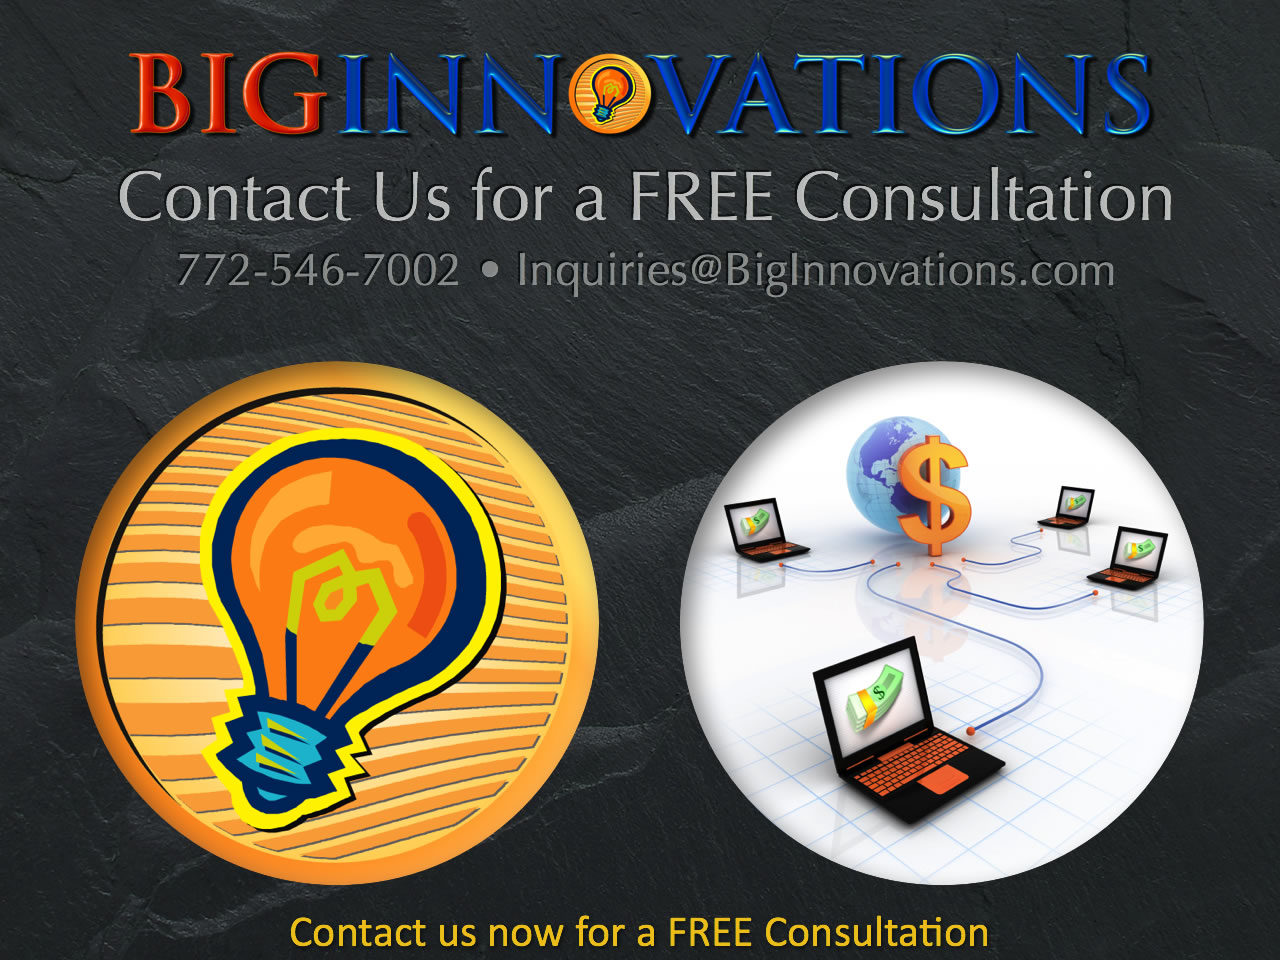 Contact Big Innovations for a FREE CONSULTATION